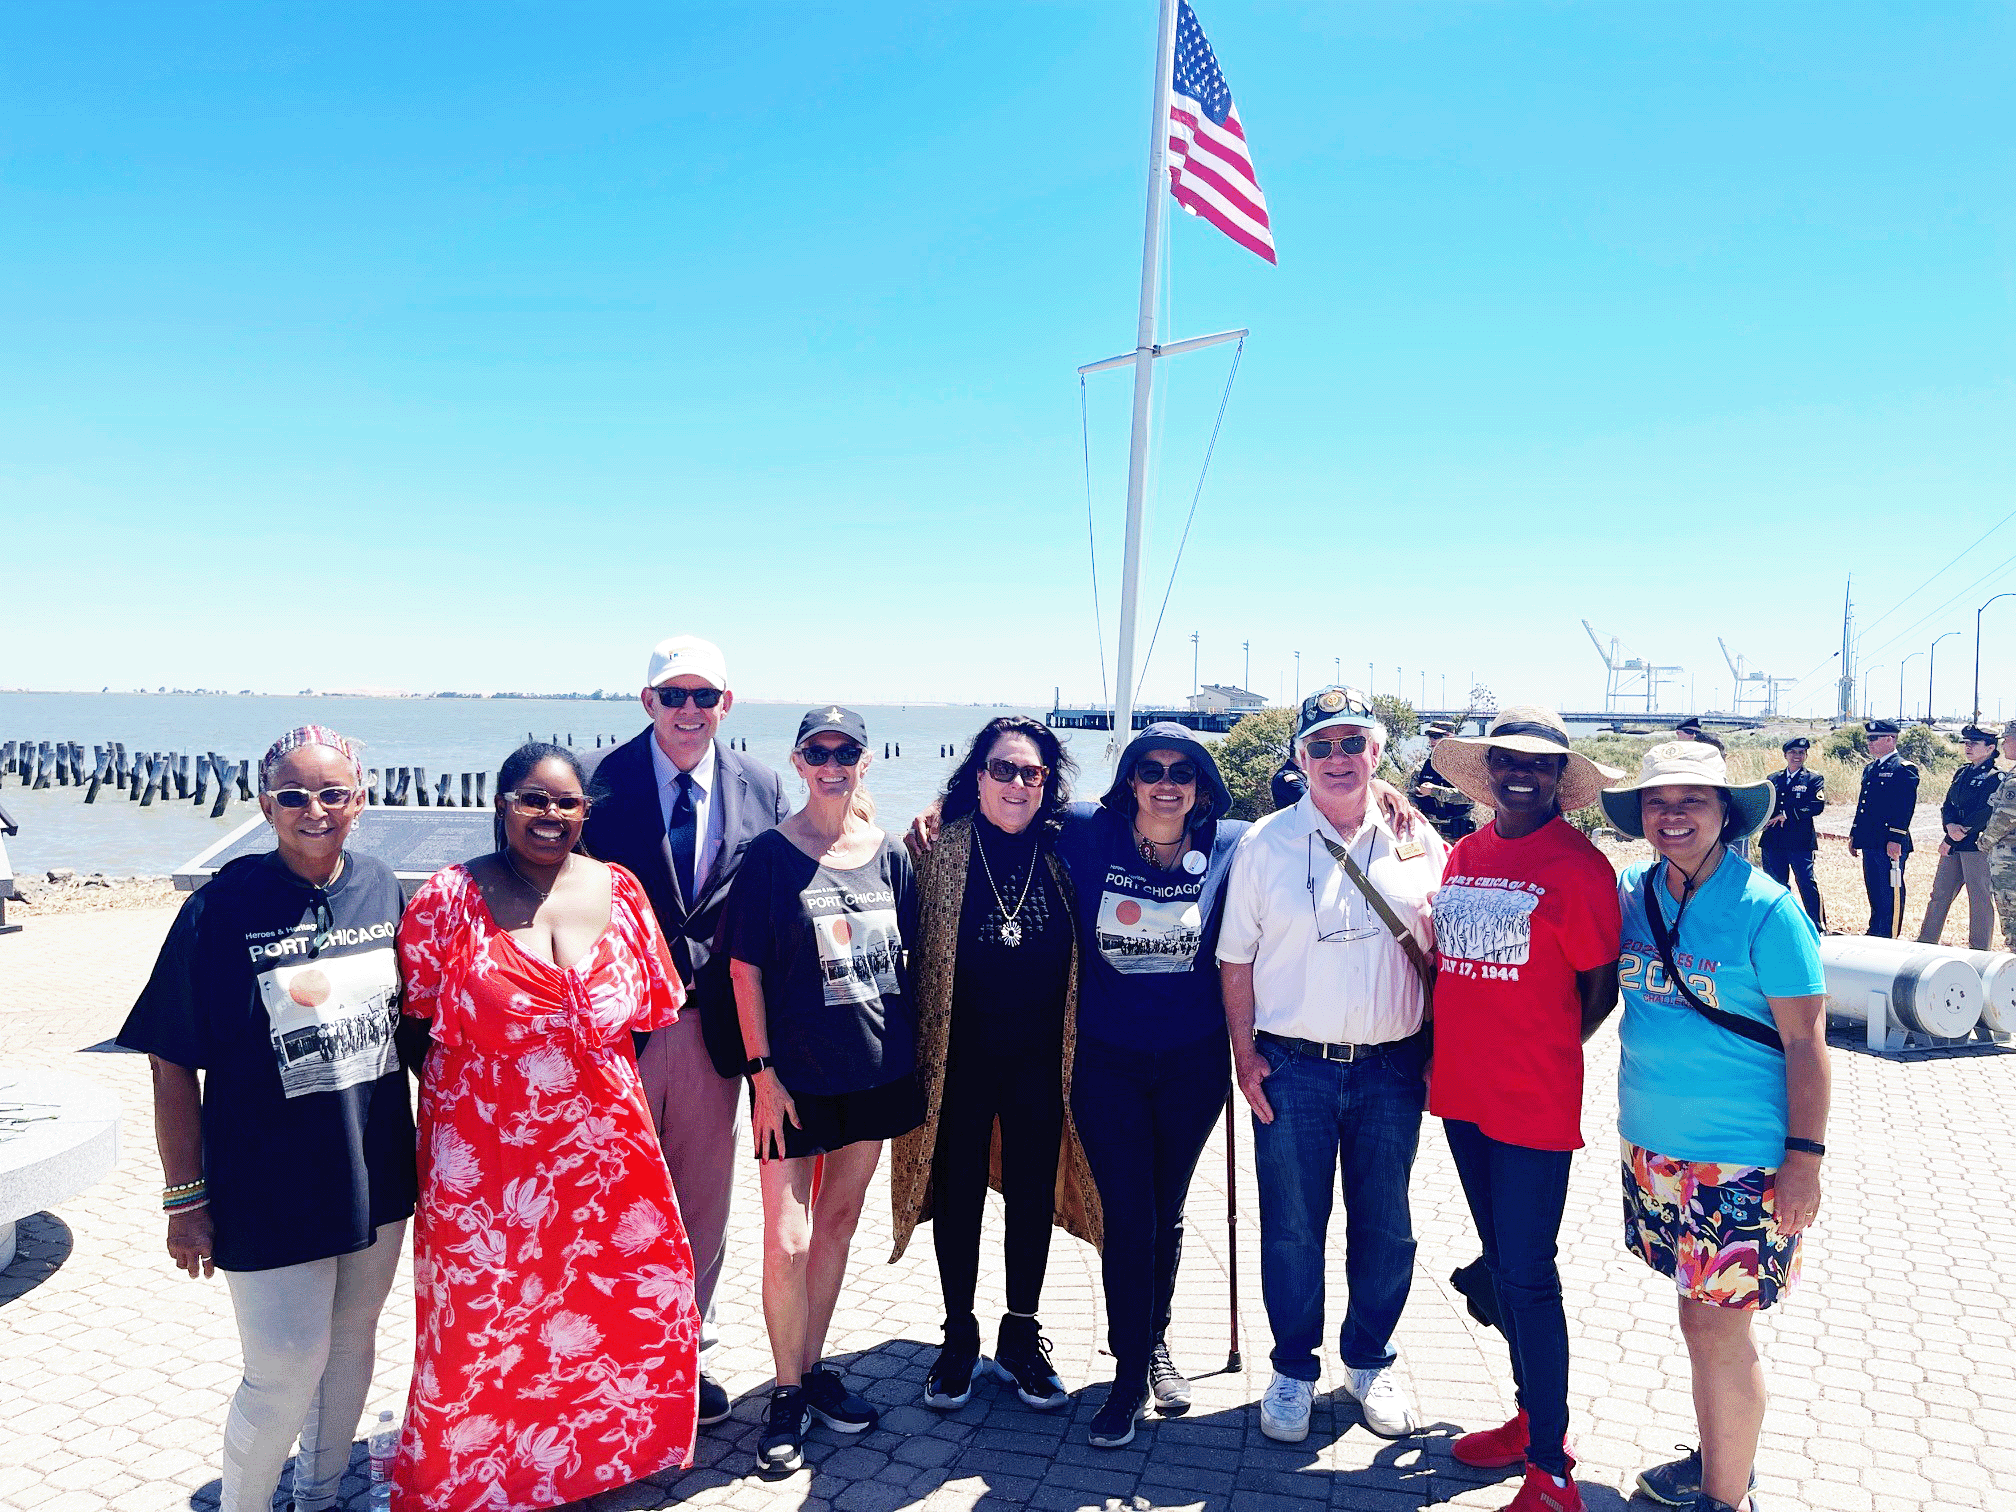 group photo of 10 attendees in front of US flag at the 79th annual commemoration of the Port Chicago Disaster on July 15, 2023.